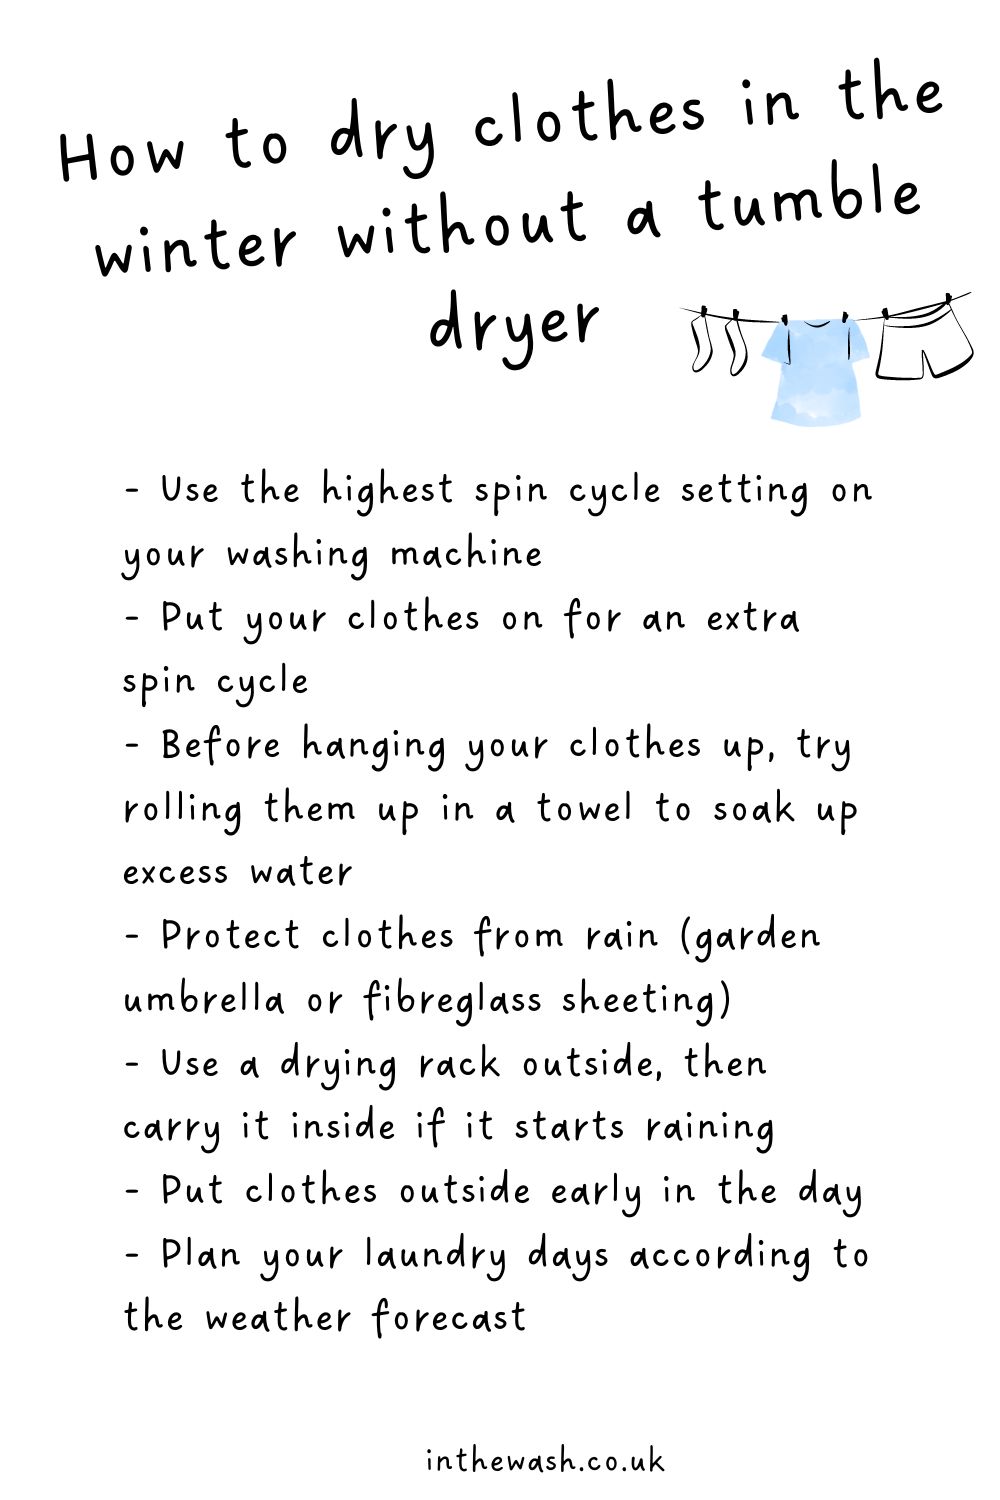 How to dry clothes in the winter without a tumble dryer